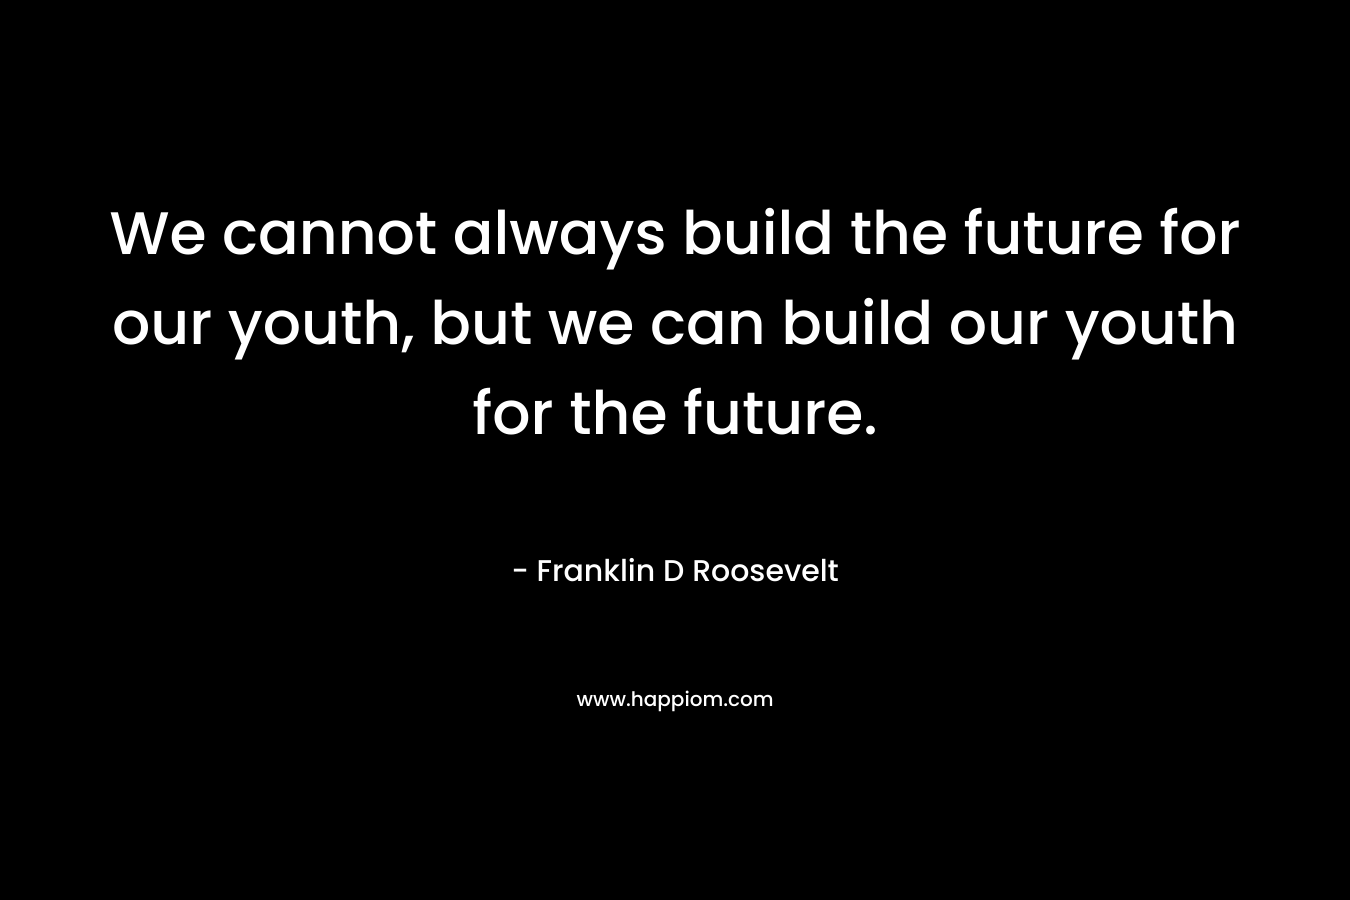 We cannot always build the future for our youth, but we can build our youth for the future.